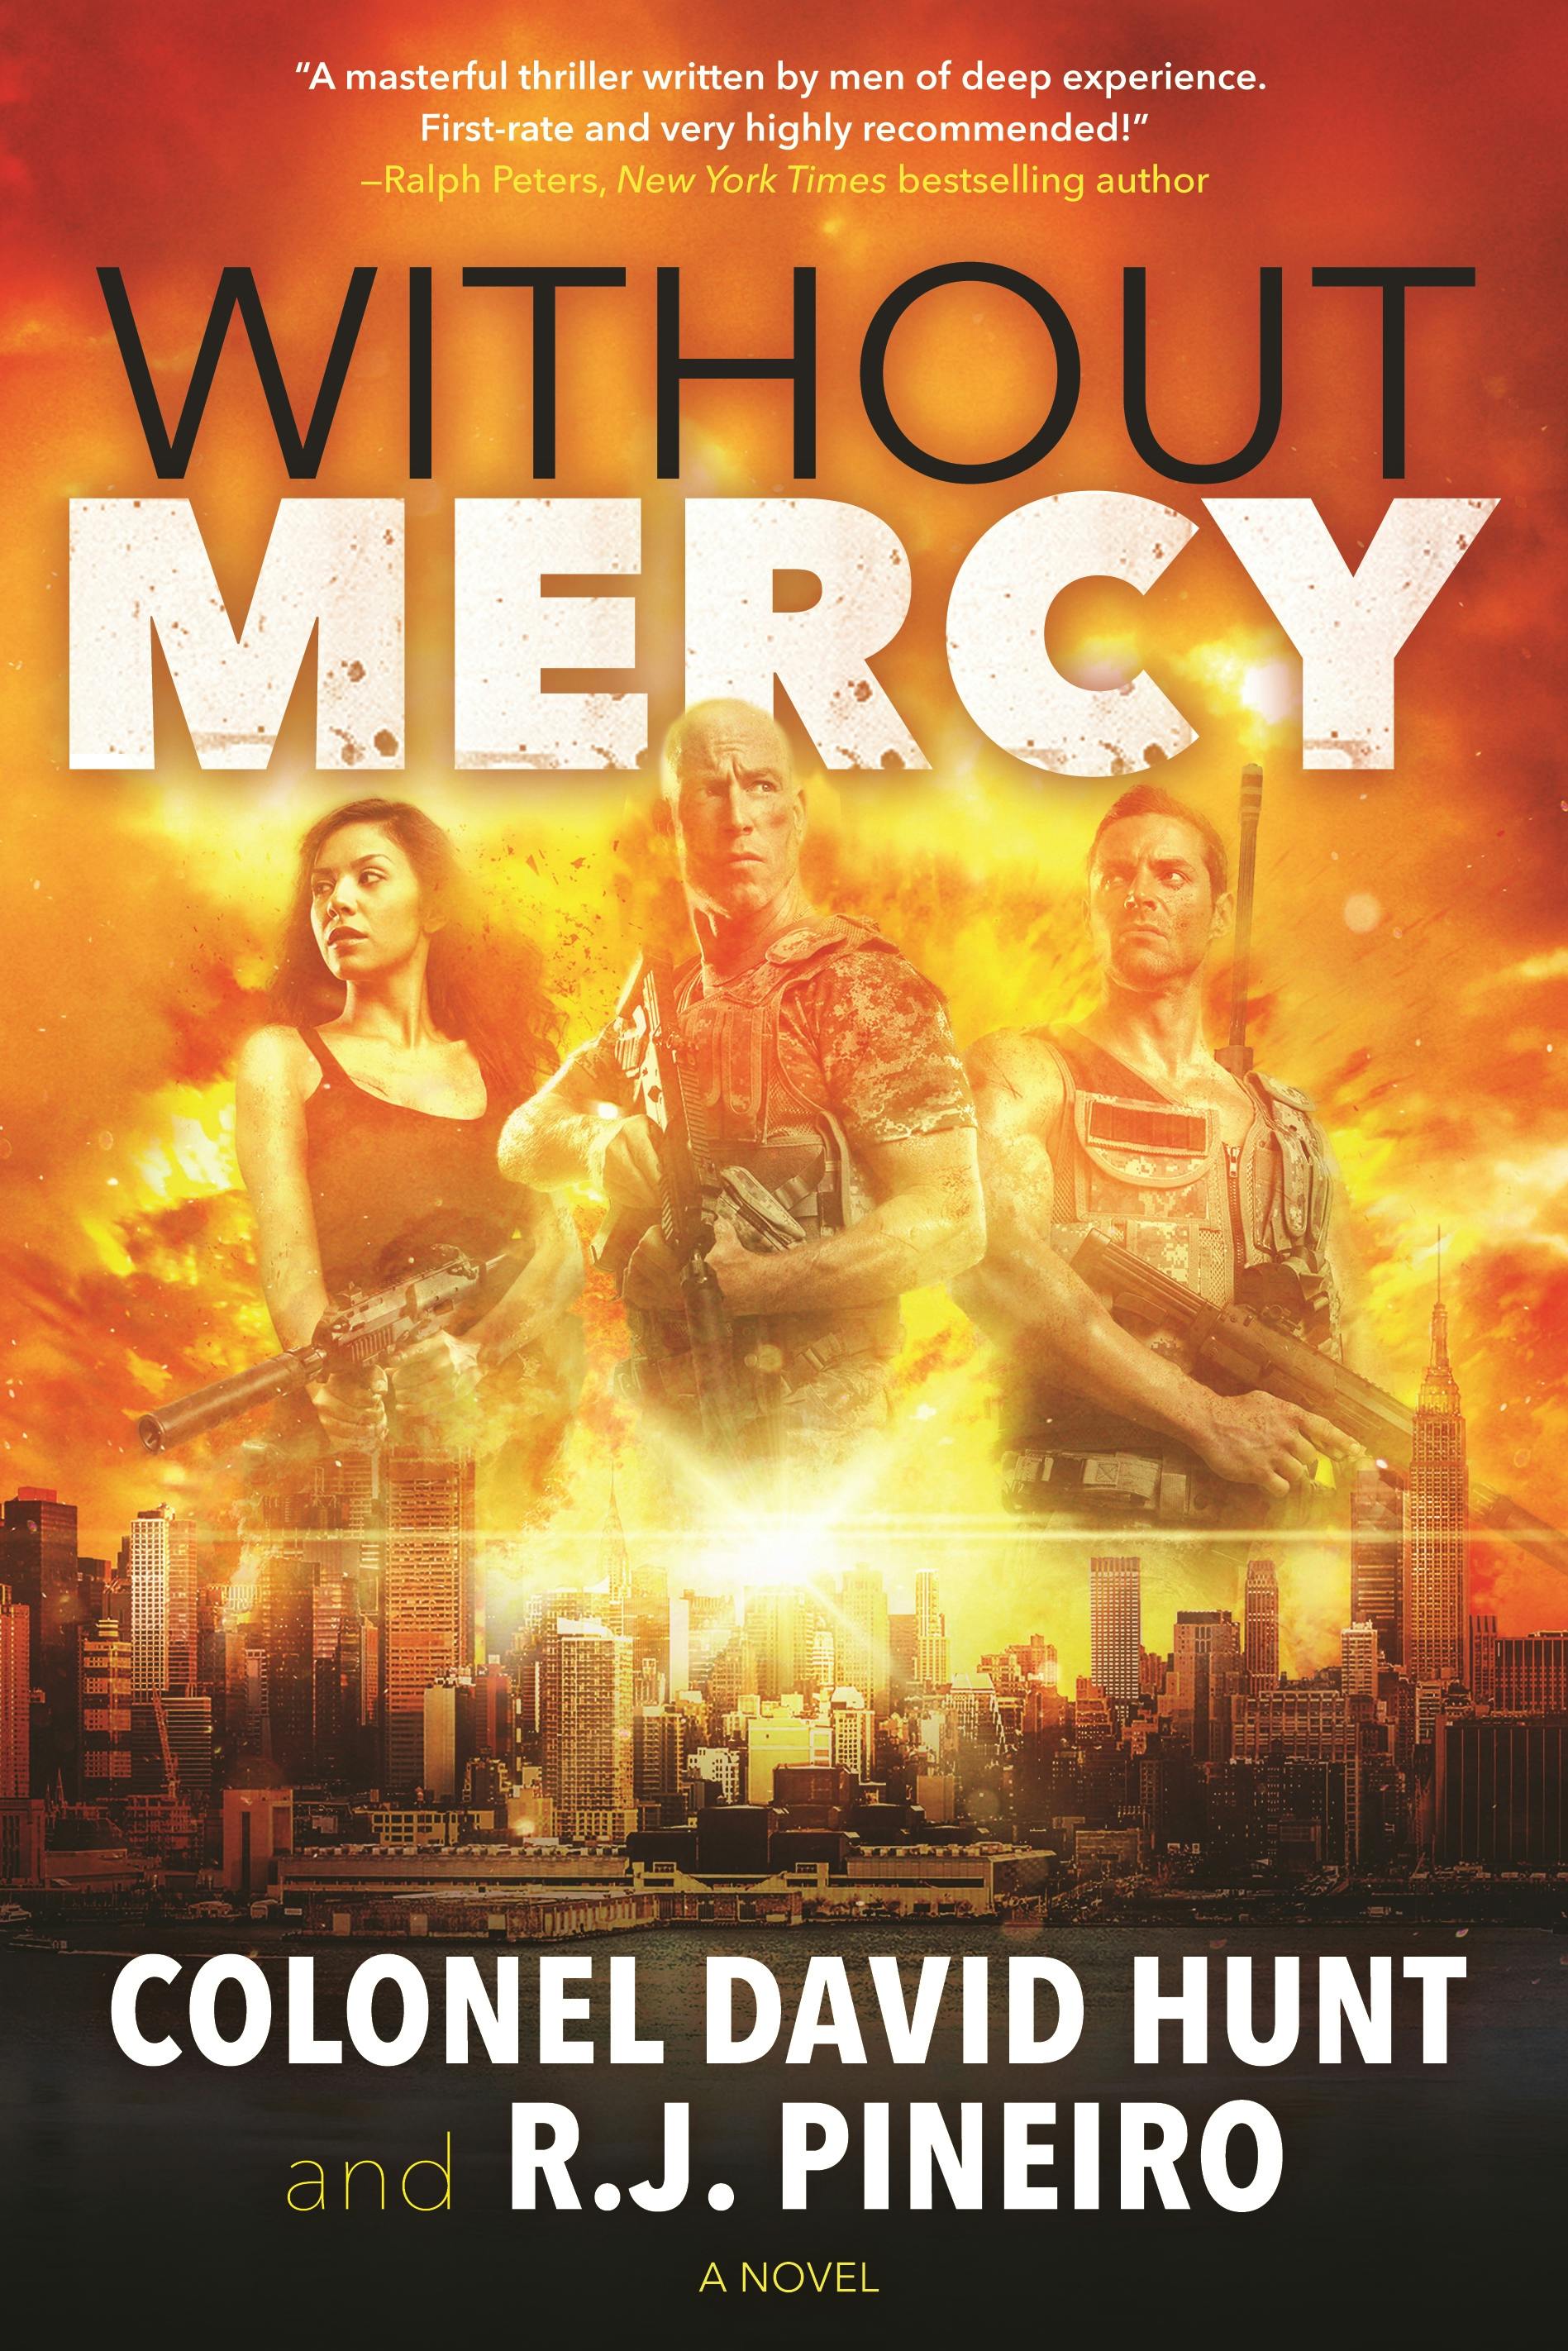 Cover for the book titled as: Without Mercy